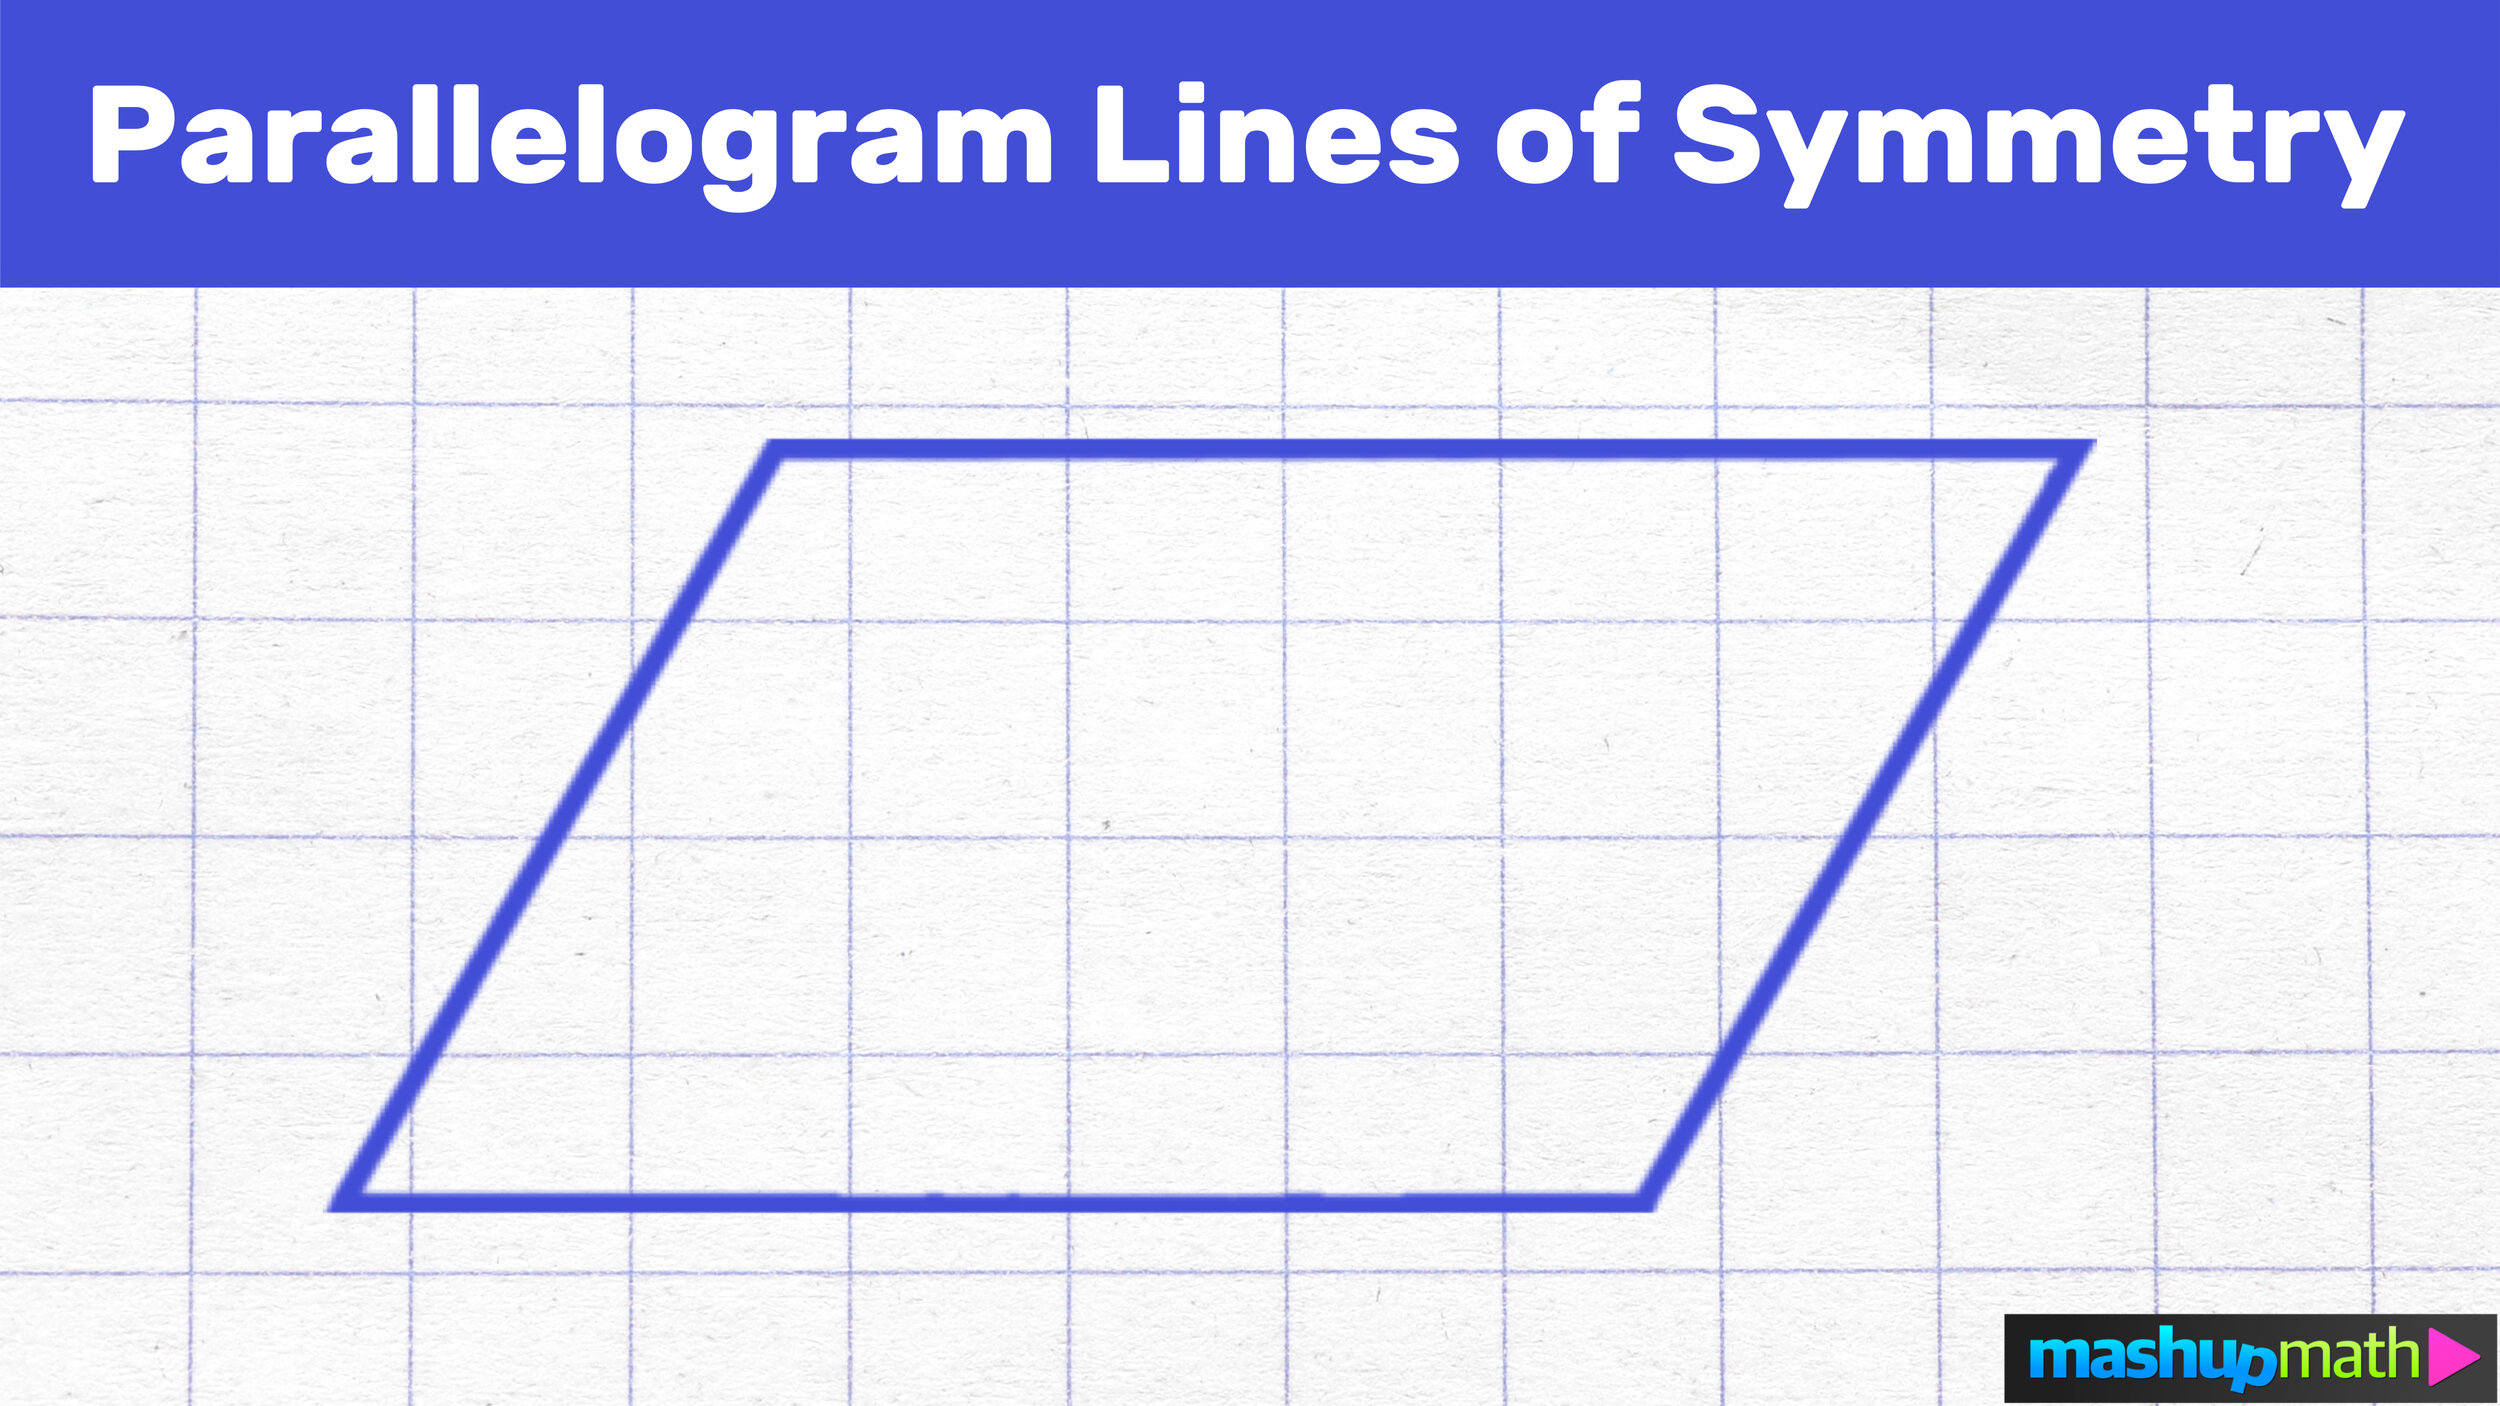 Parallelogram Lines Of Symmetry Explained Mashup Math